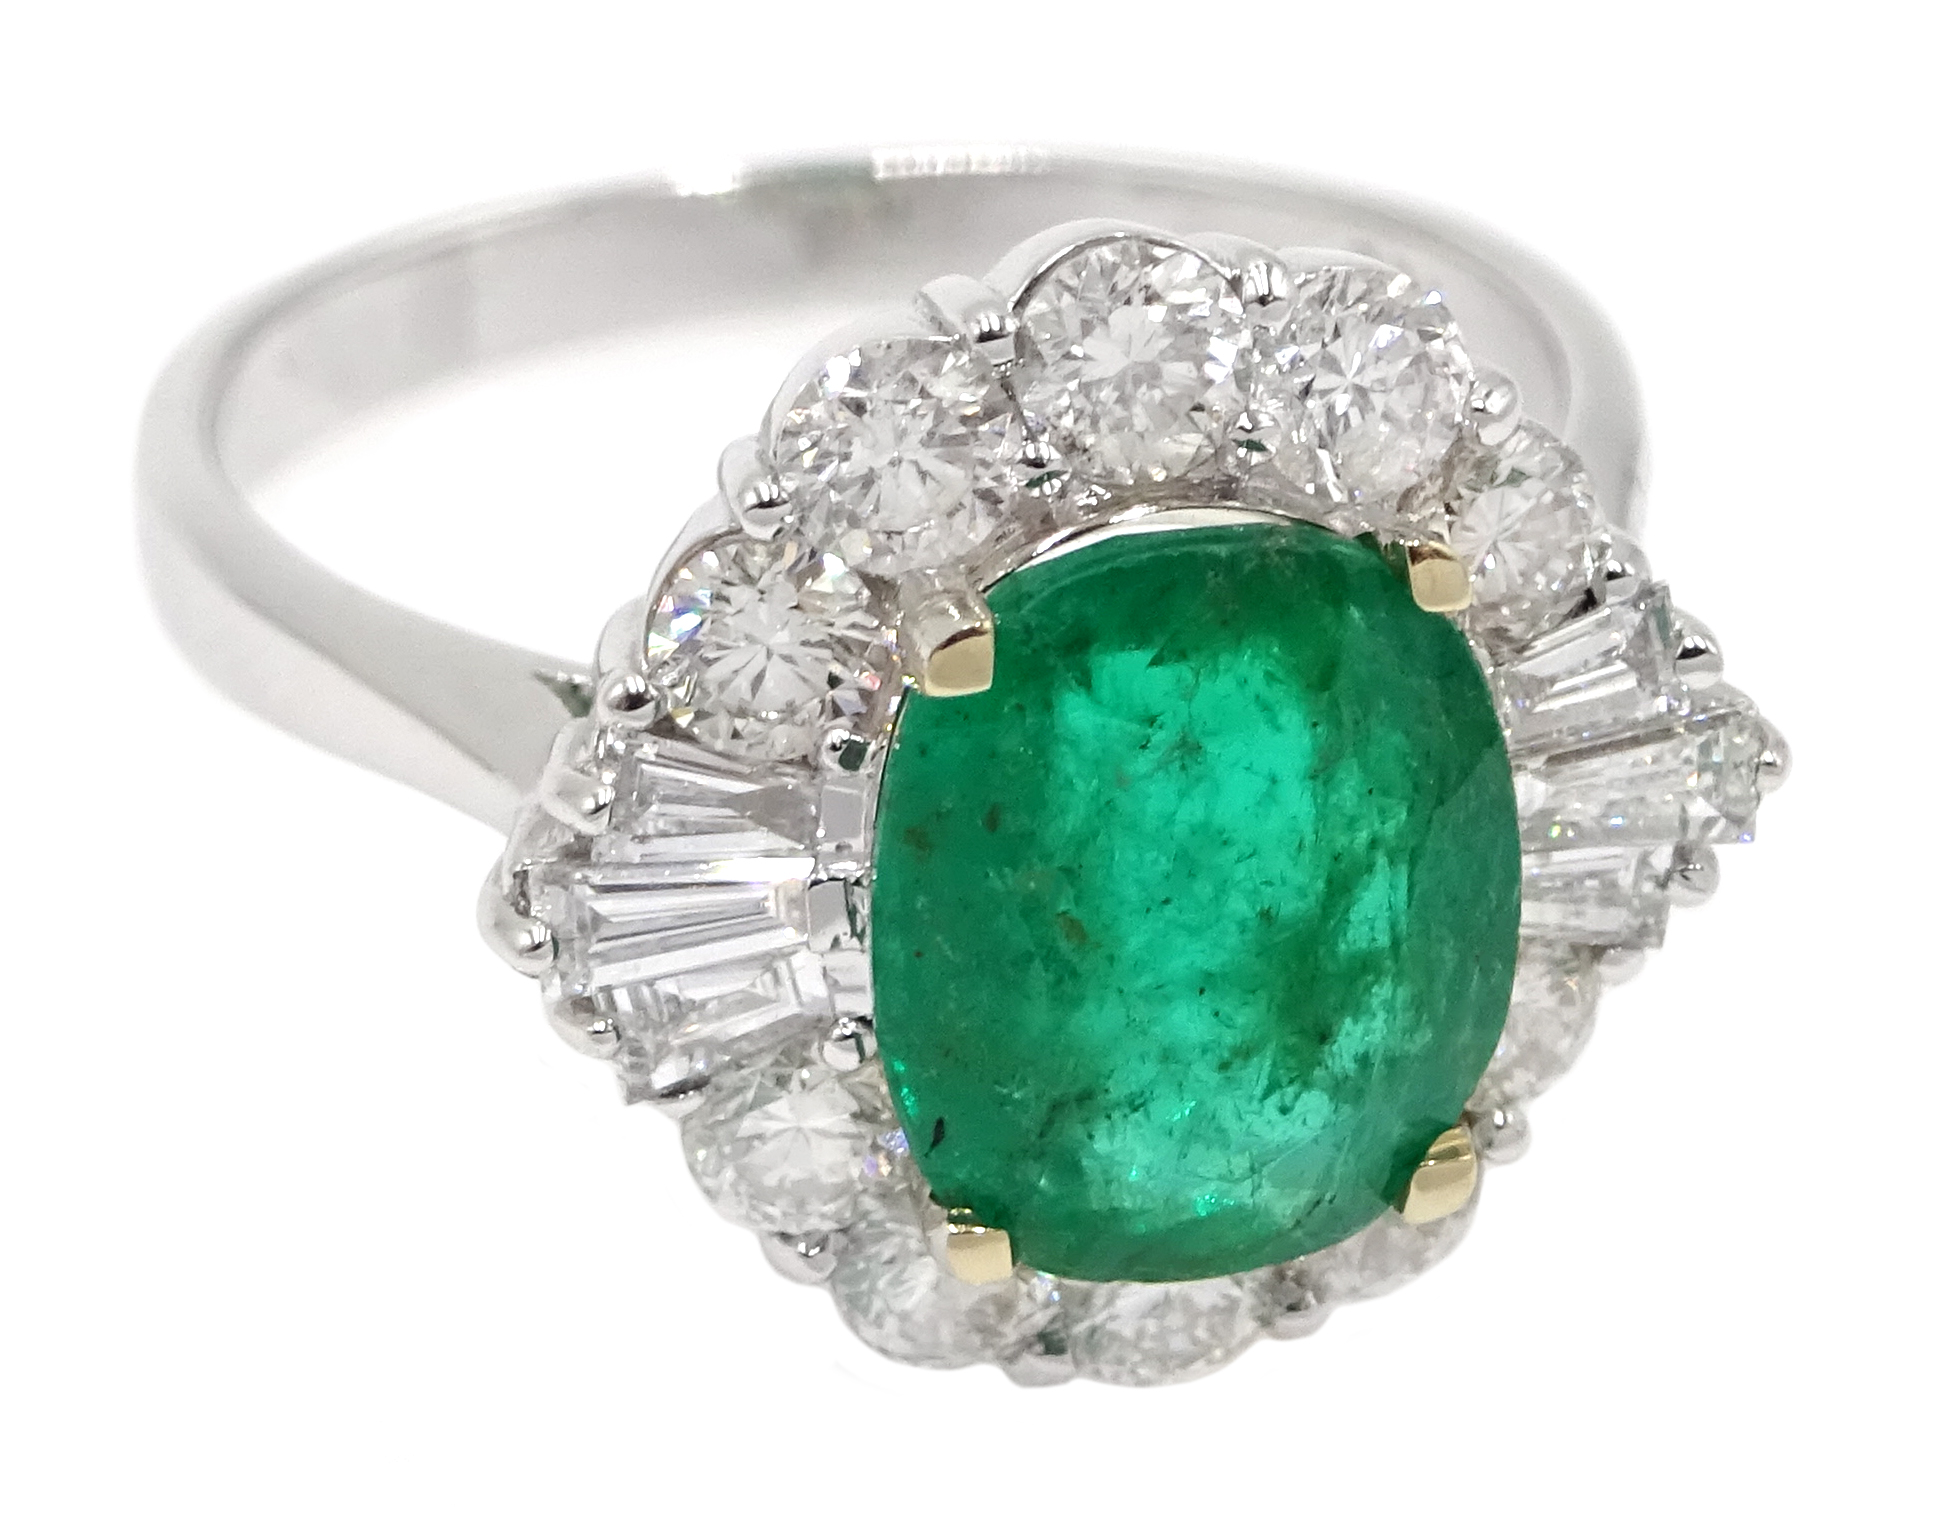 18ct white gold, emerald and diamond ring, set with a central oval shaped emerald, emerald total wei - Image 3 of 6